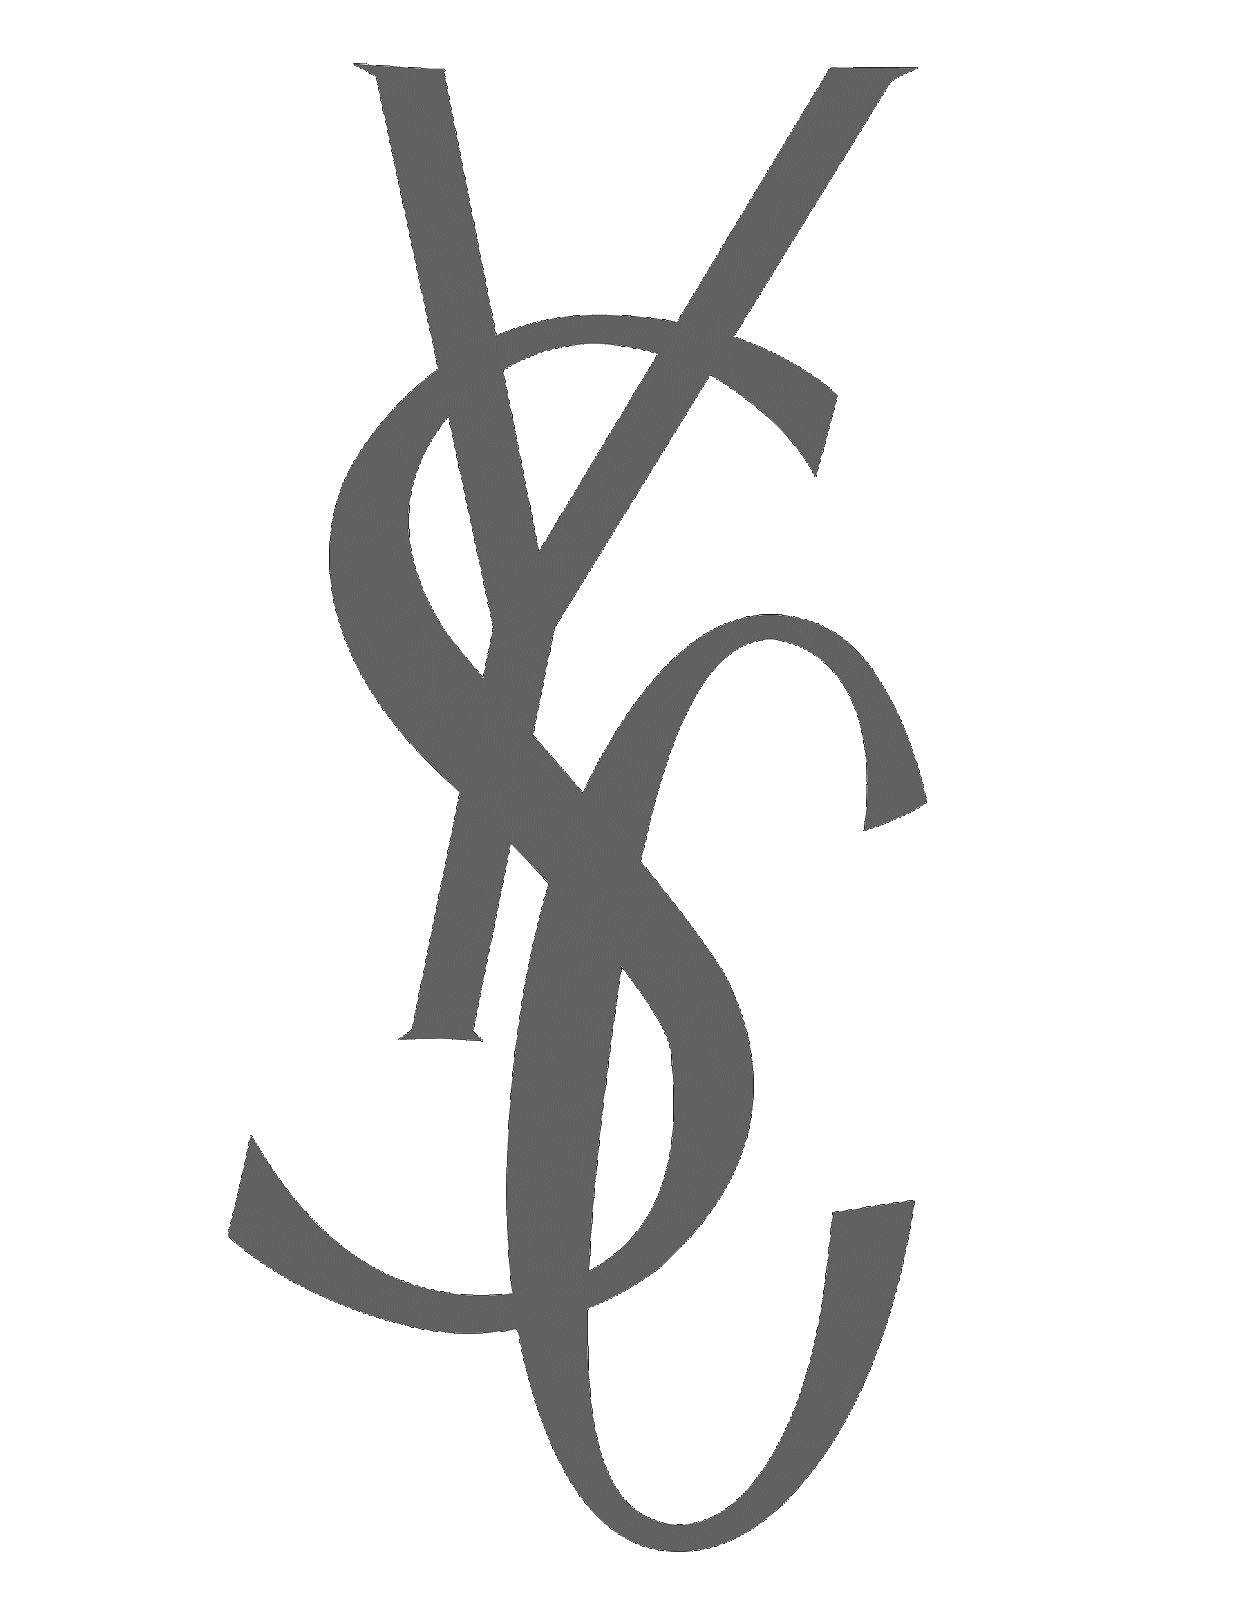 The Real YSC: Our New Logo